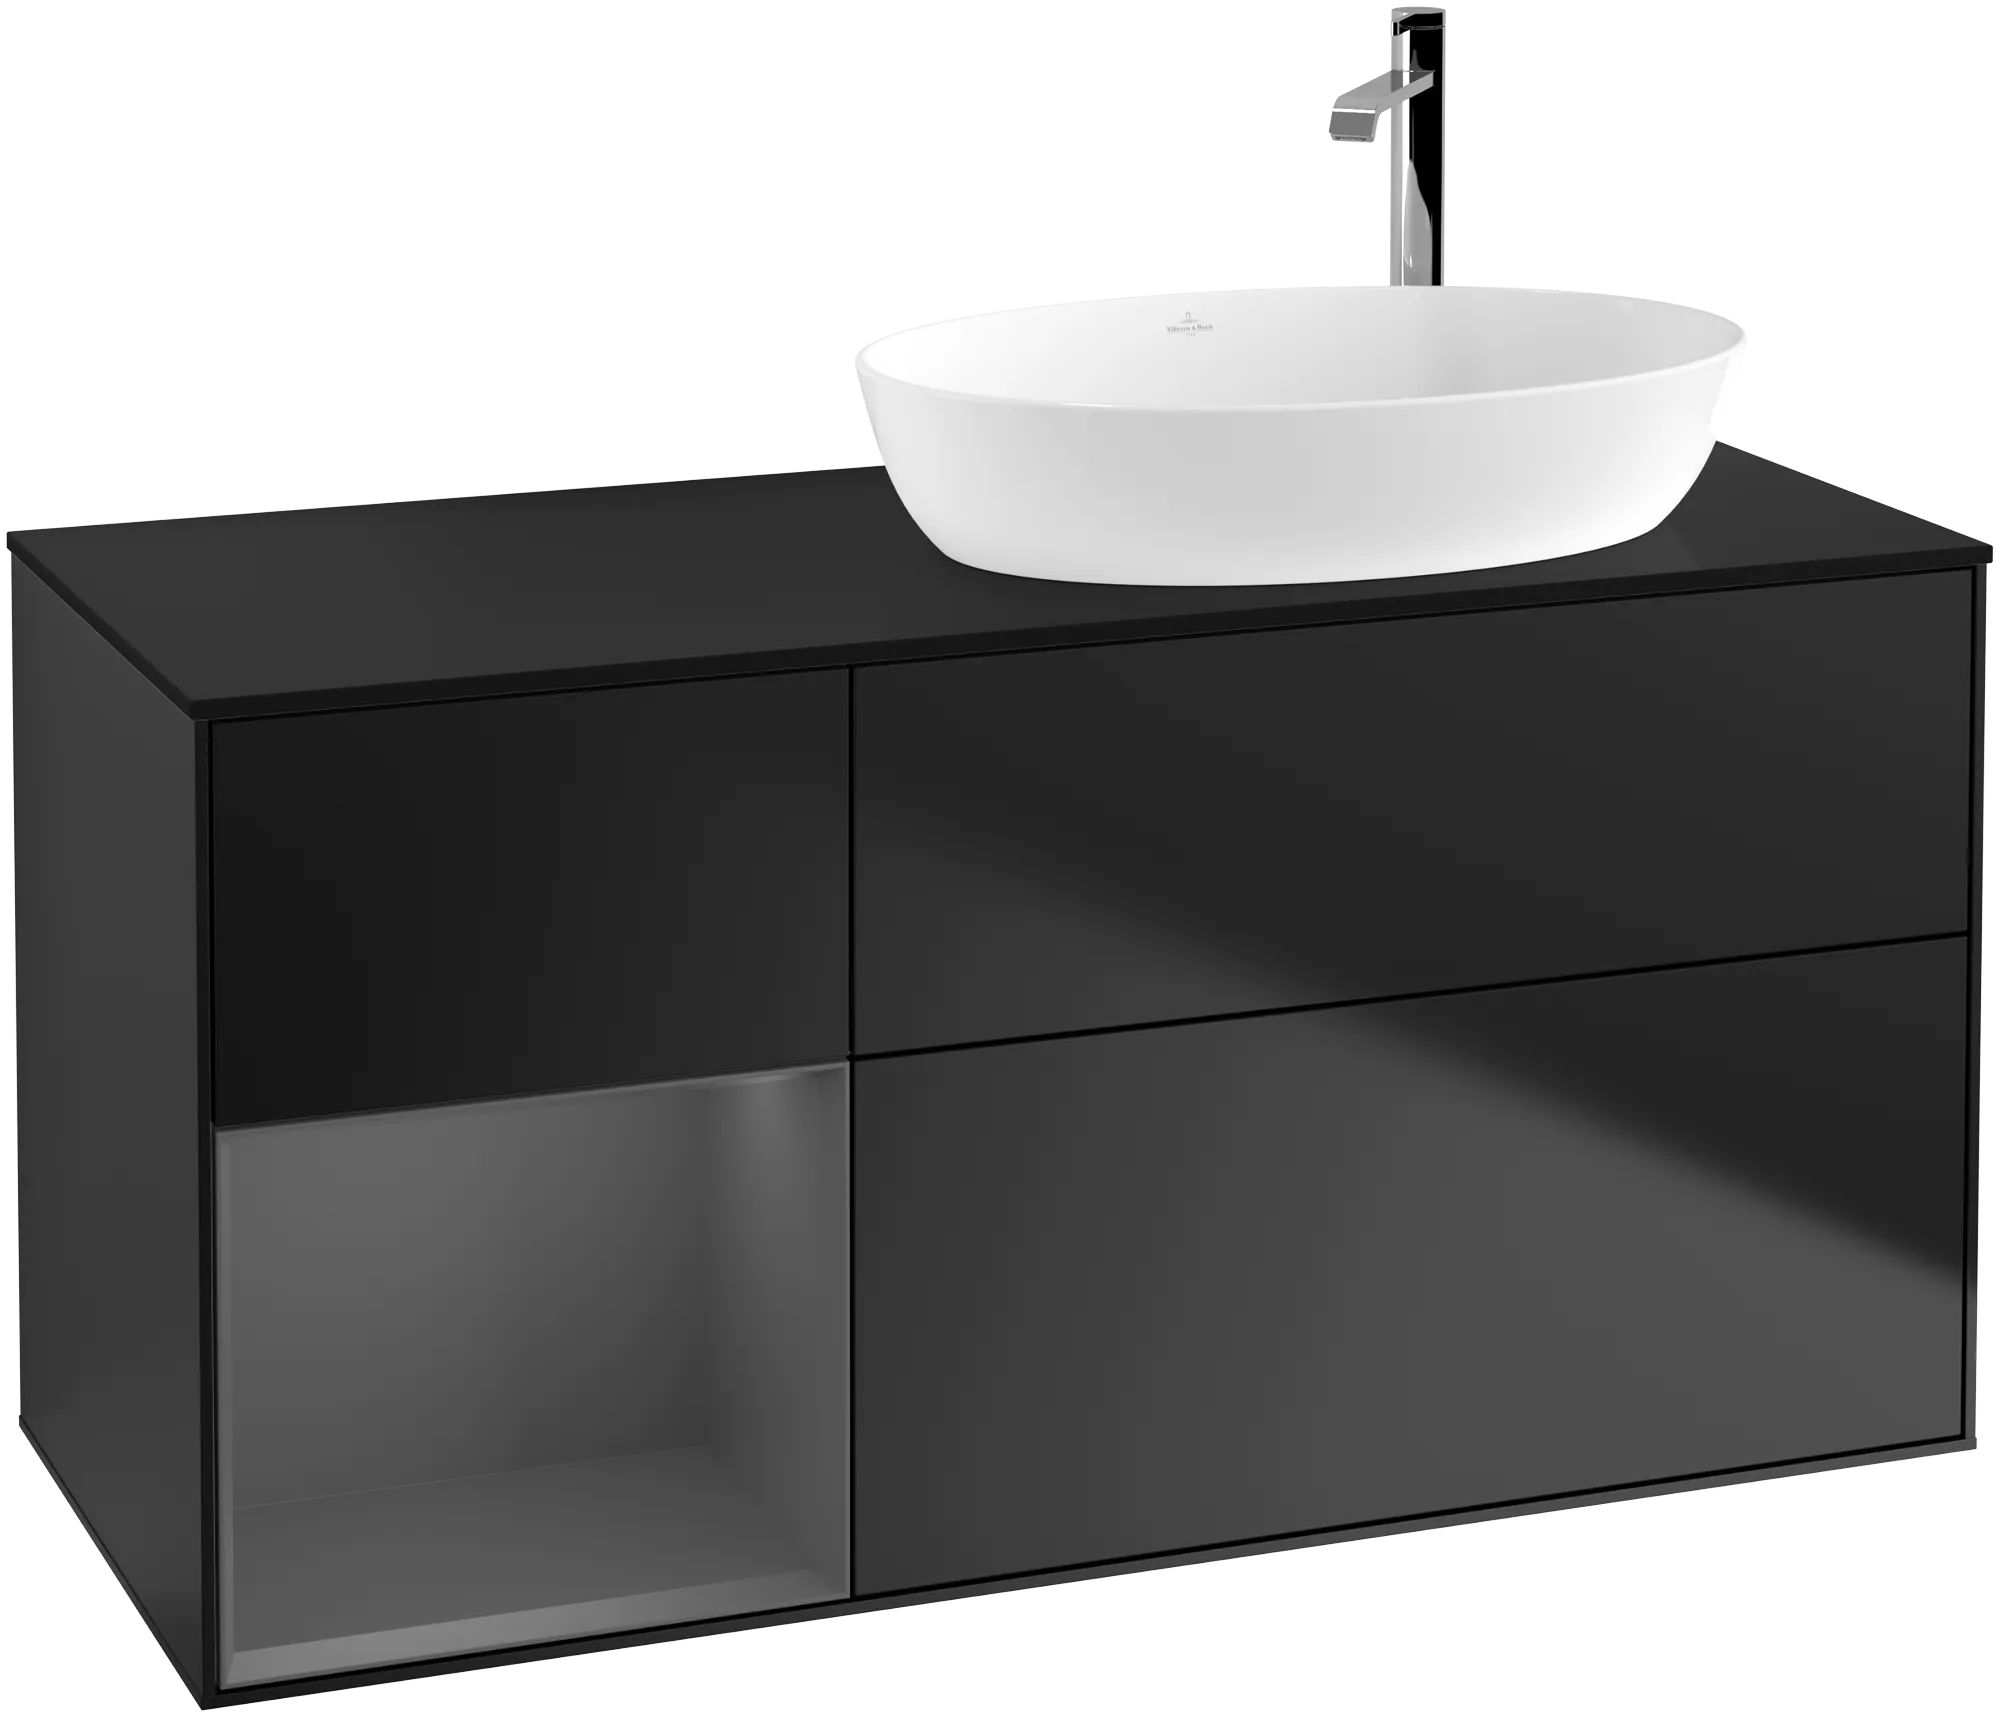 Picture of VILLEROY BOCH Finion Vanity unit, with lighting, 3 pull-out compartments, 1200 x 603 x 501 mm, Black Matt Lacquer / Anthracite Matt Lacquer / Glass Black Matt #G922GKPD